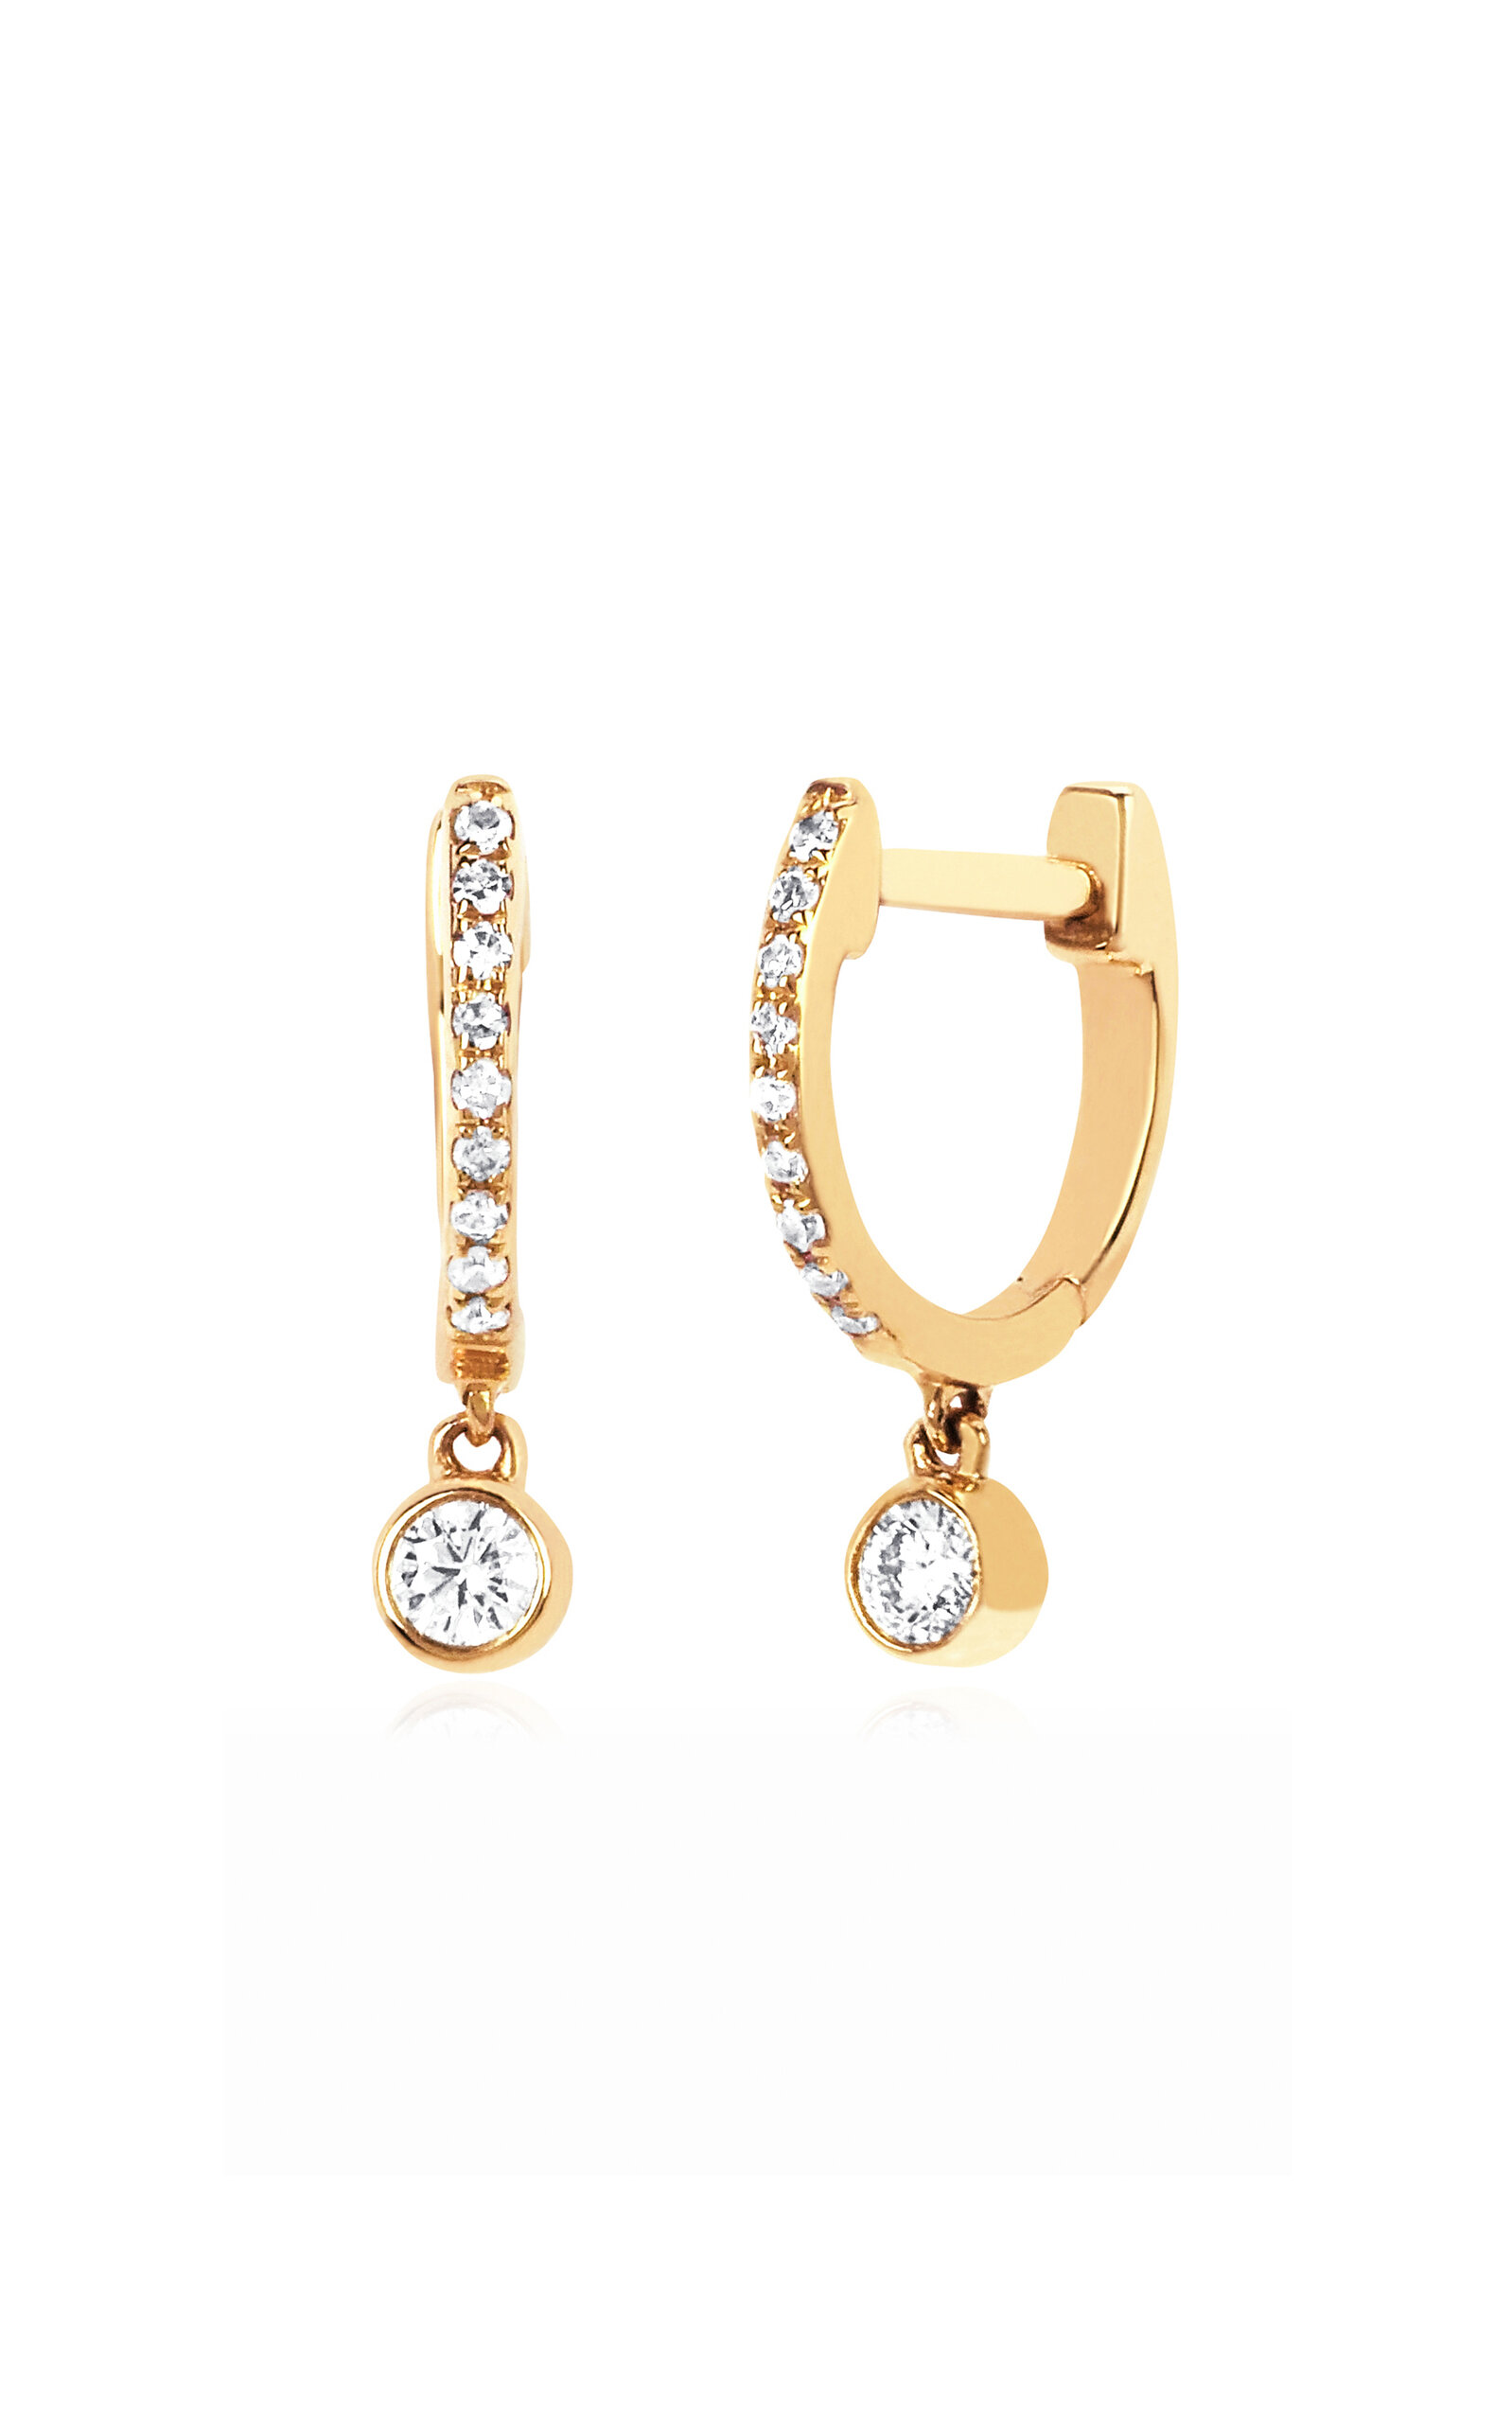 Ef Collection 14k Gold Diamond And Quartz Earrings